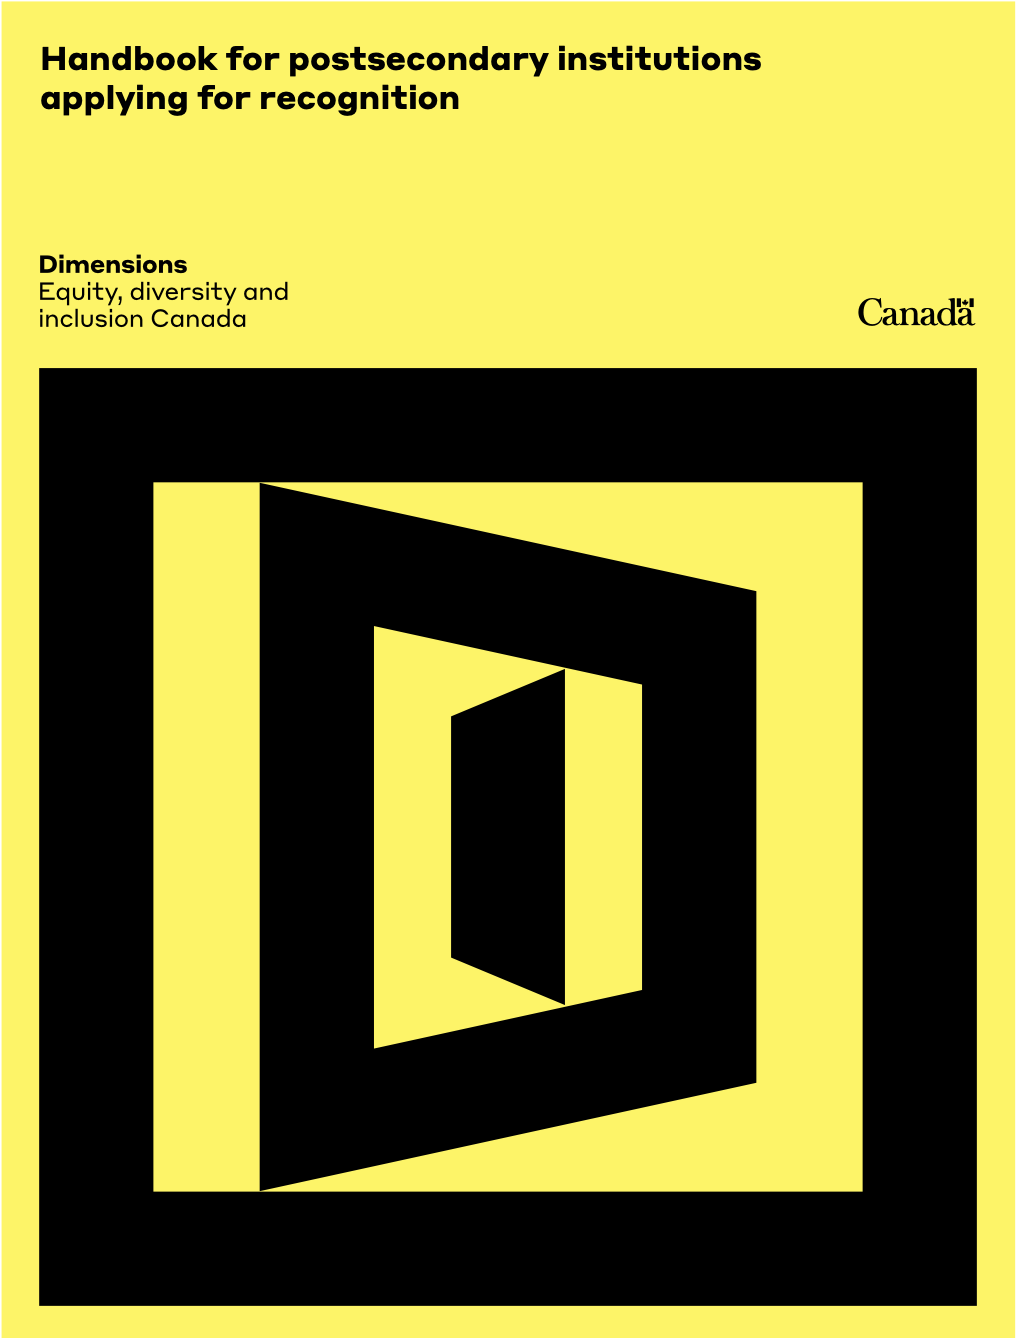 Dimensions Equity, Diversity, Inclusions Canada - Handbook for postsecondary institutions applying for recognition